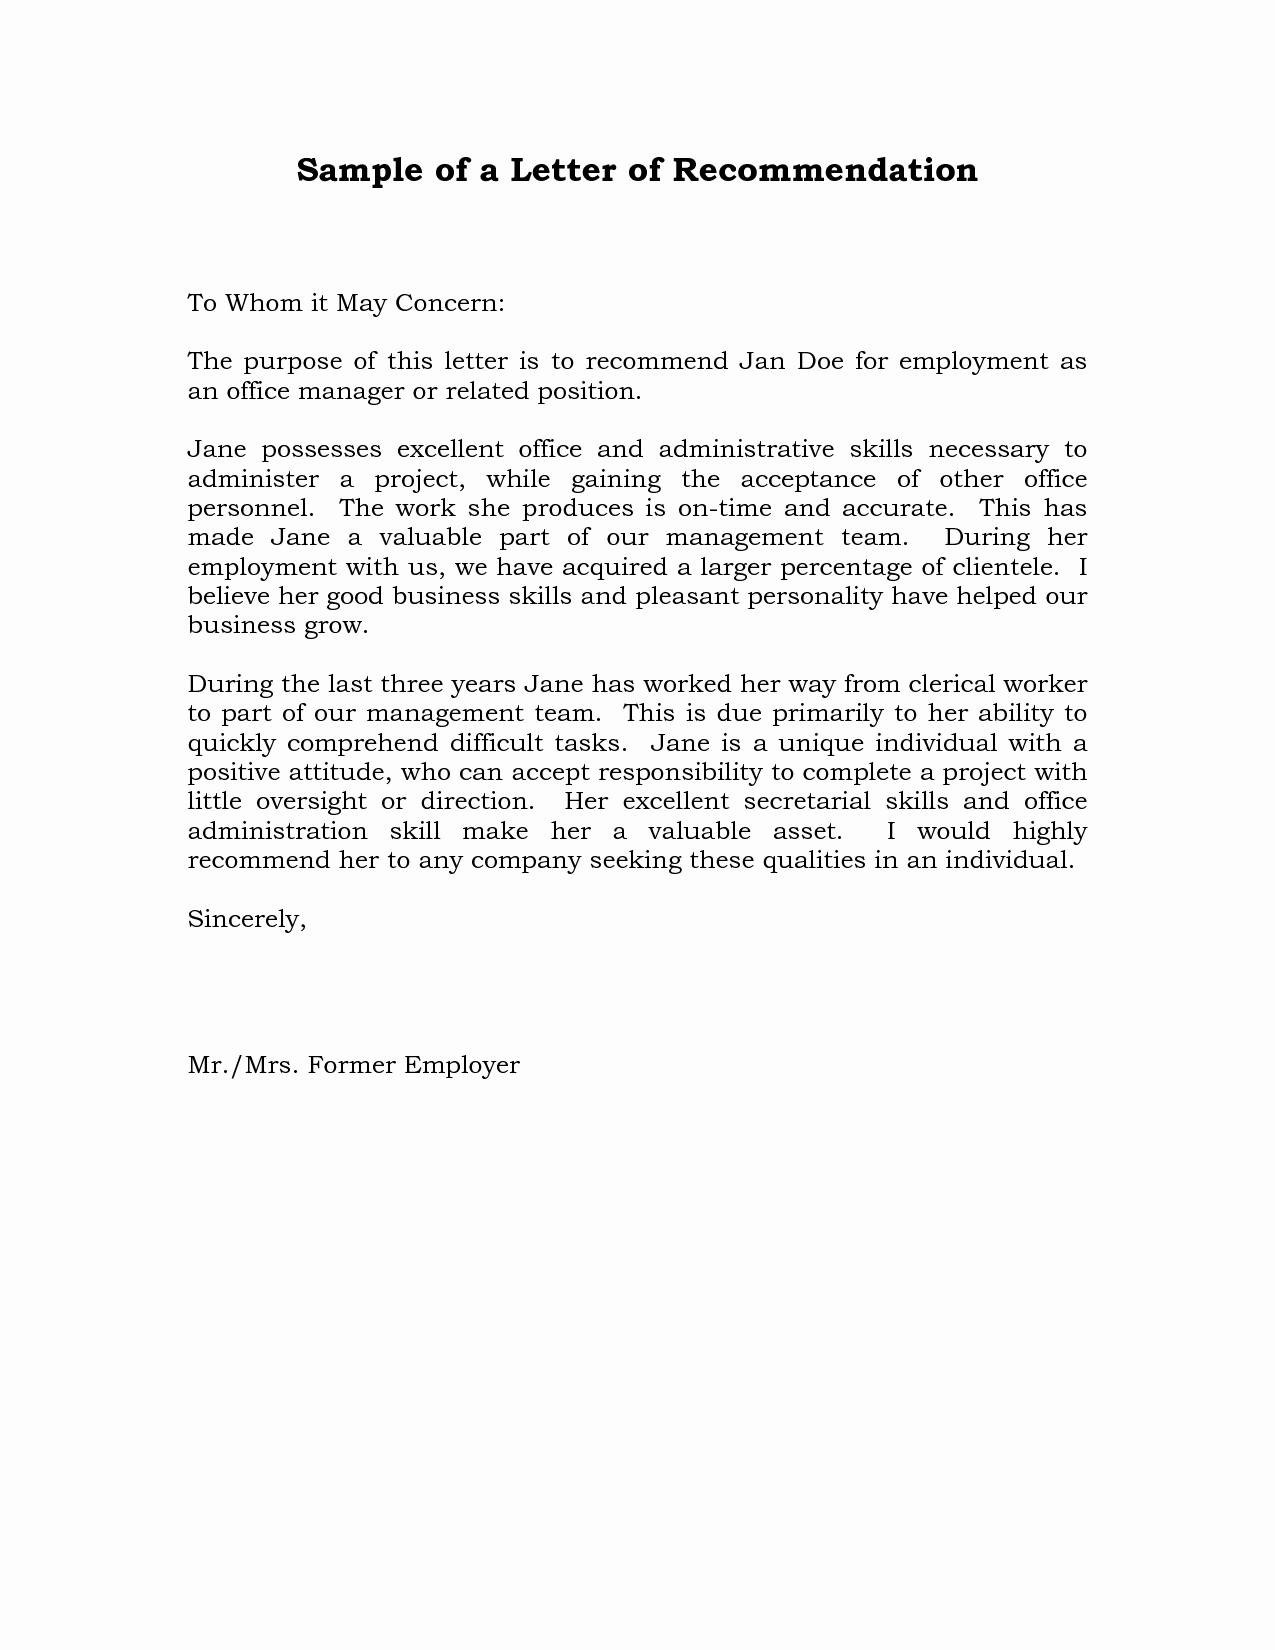 Sample Job Letter Of Recommendation From Employer Sample within sizing 1275 X 1650